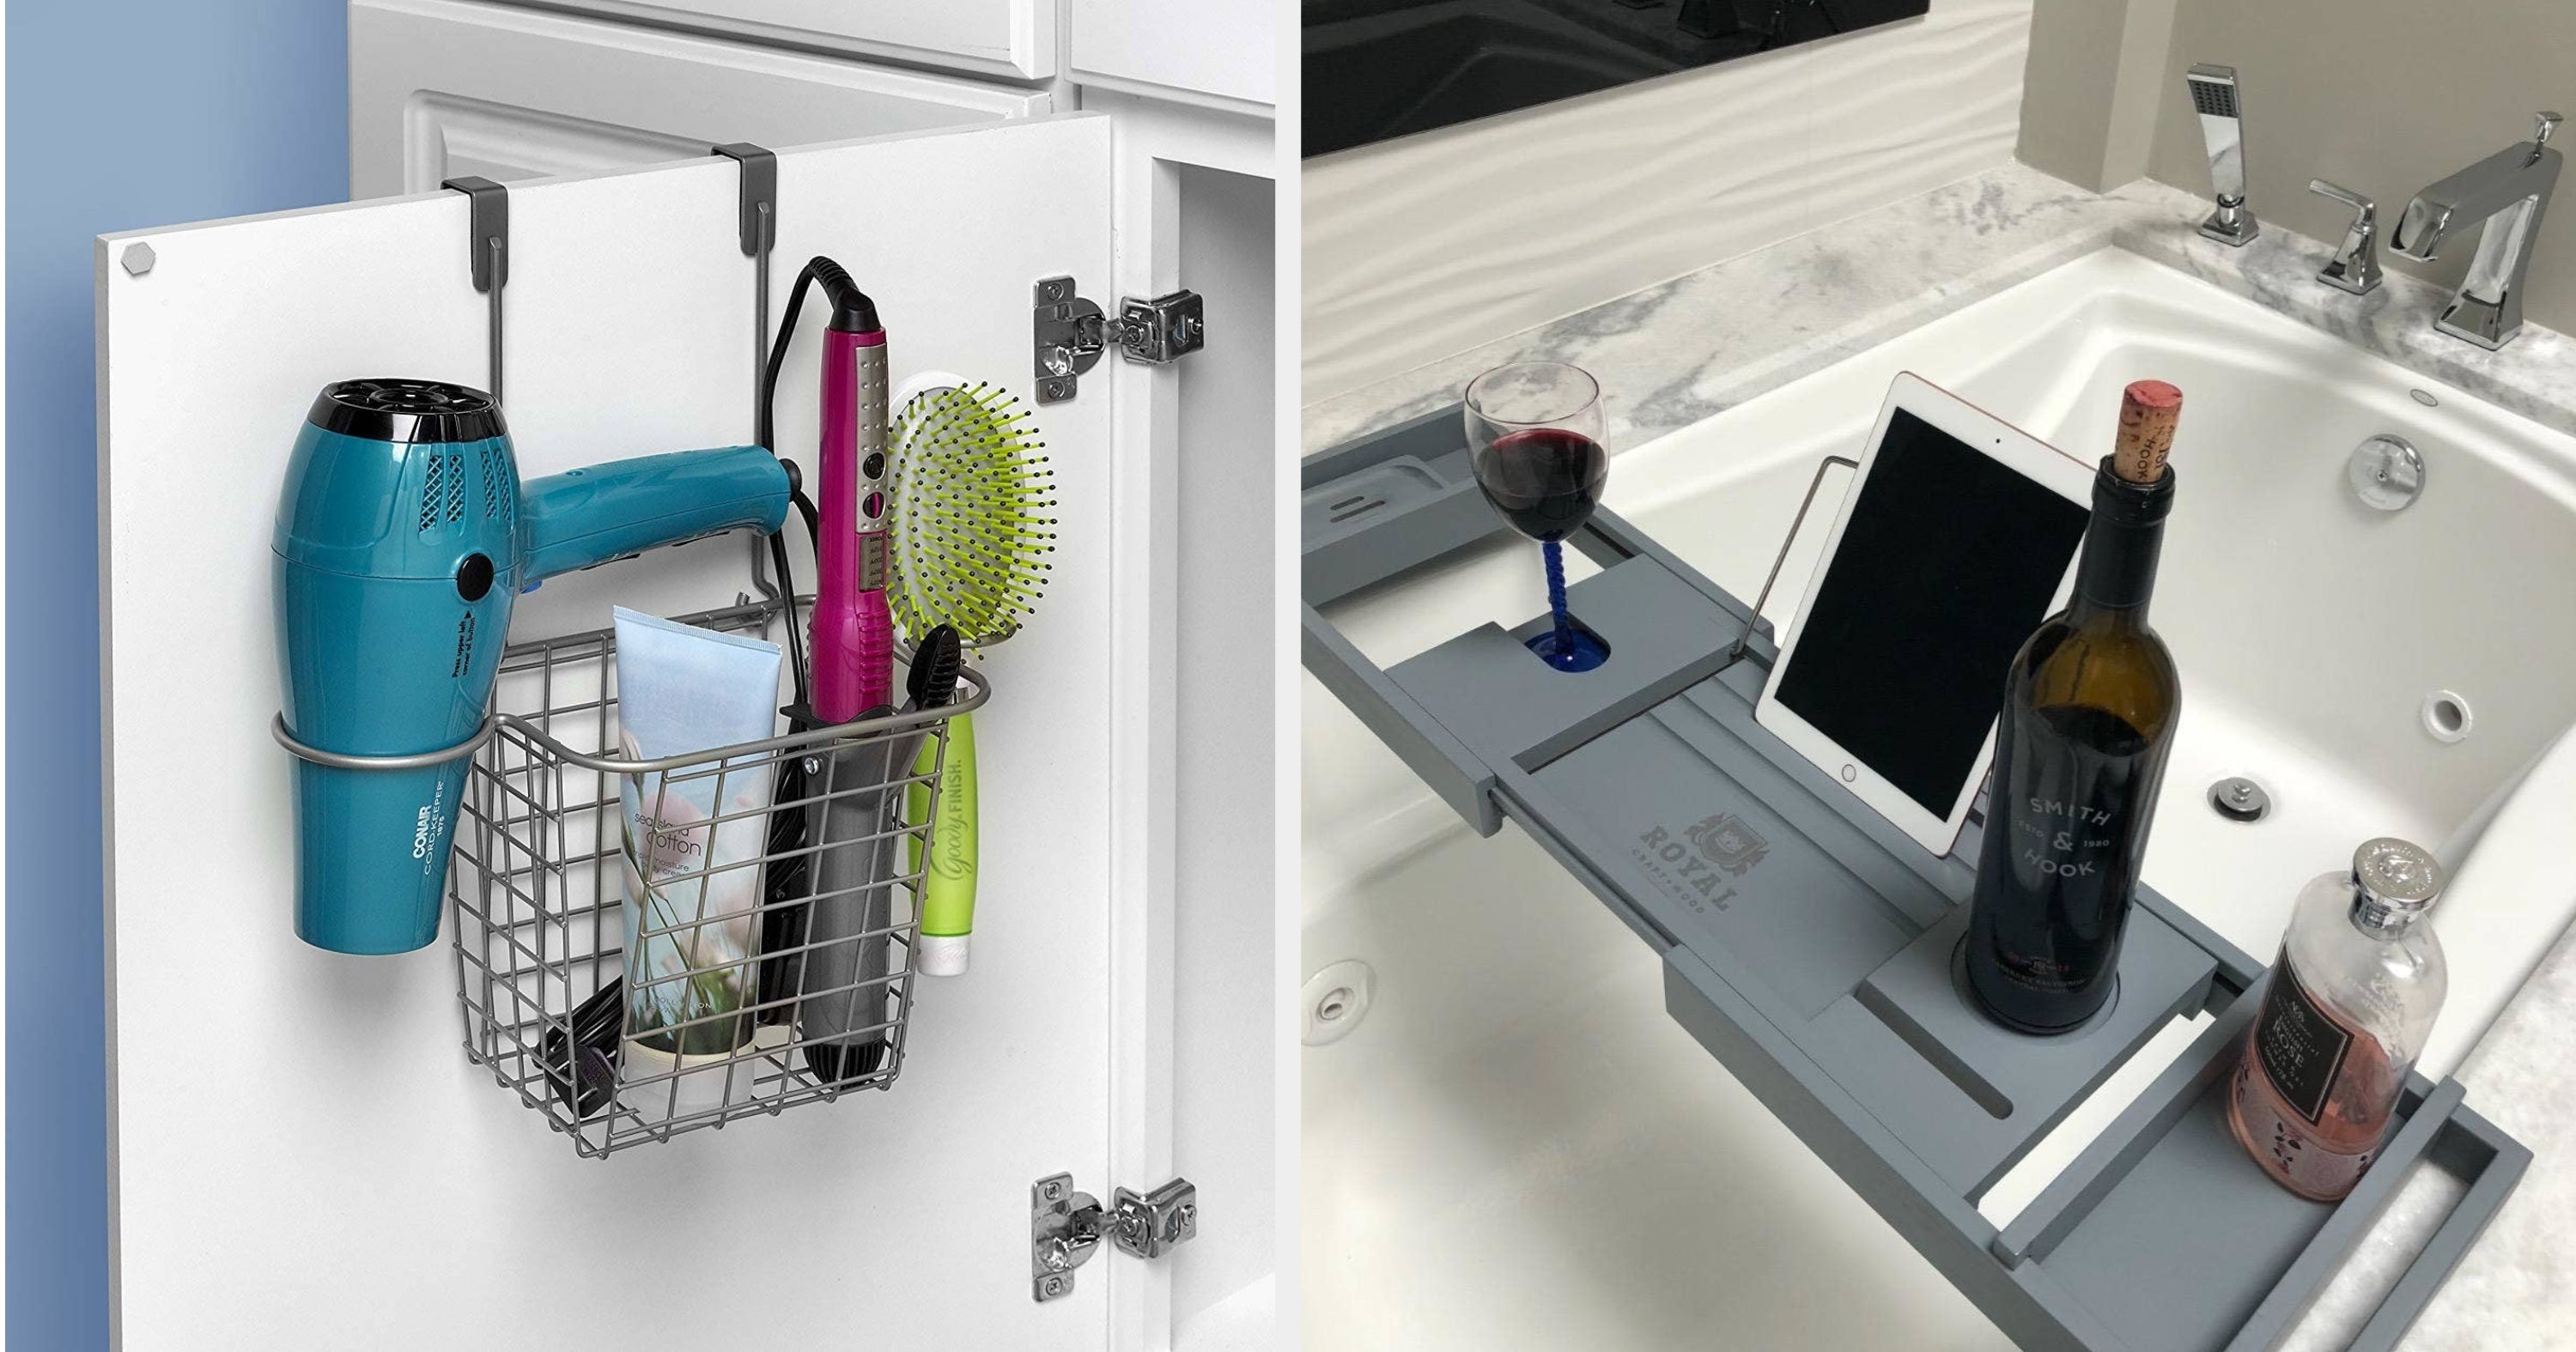 34 Best Bathroom Accessories You Can Get On